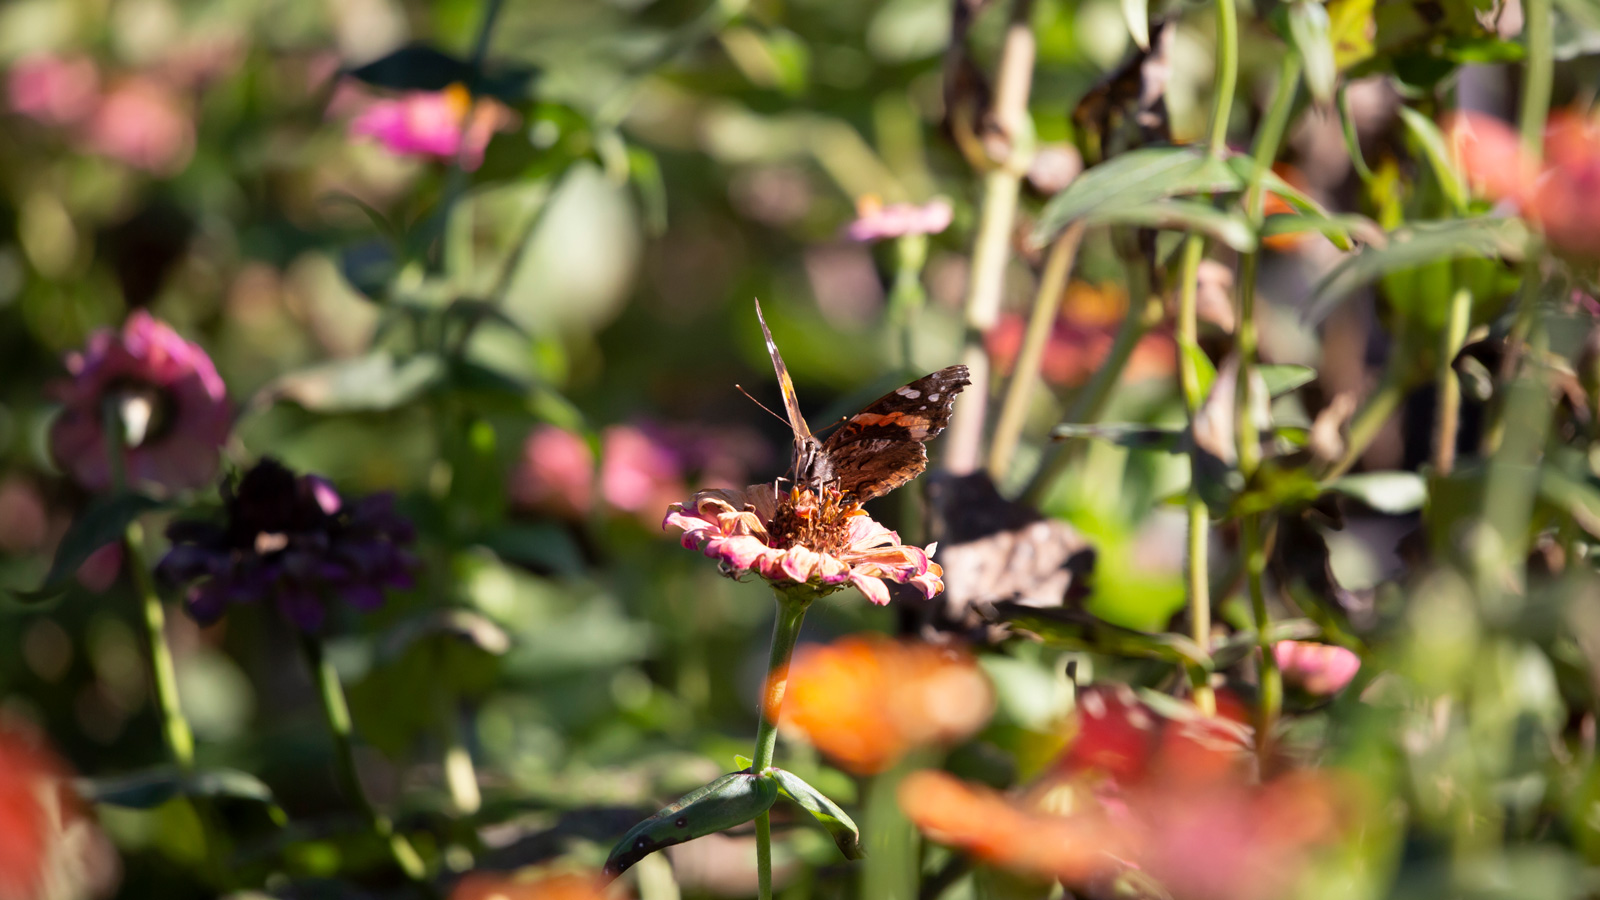 Red admiral drinking nectar from a pink flower